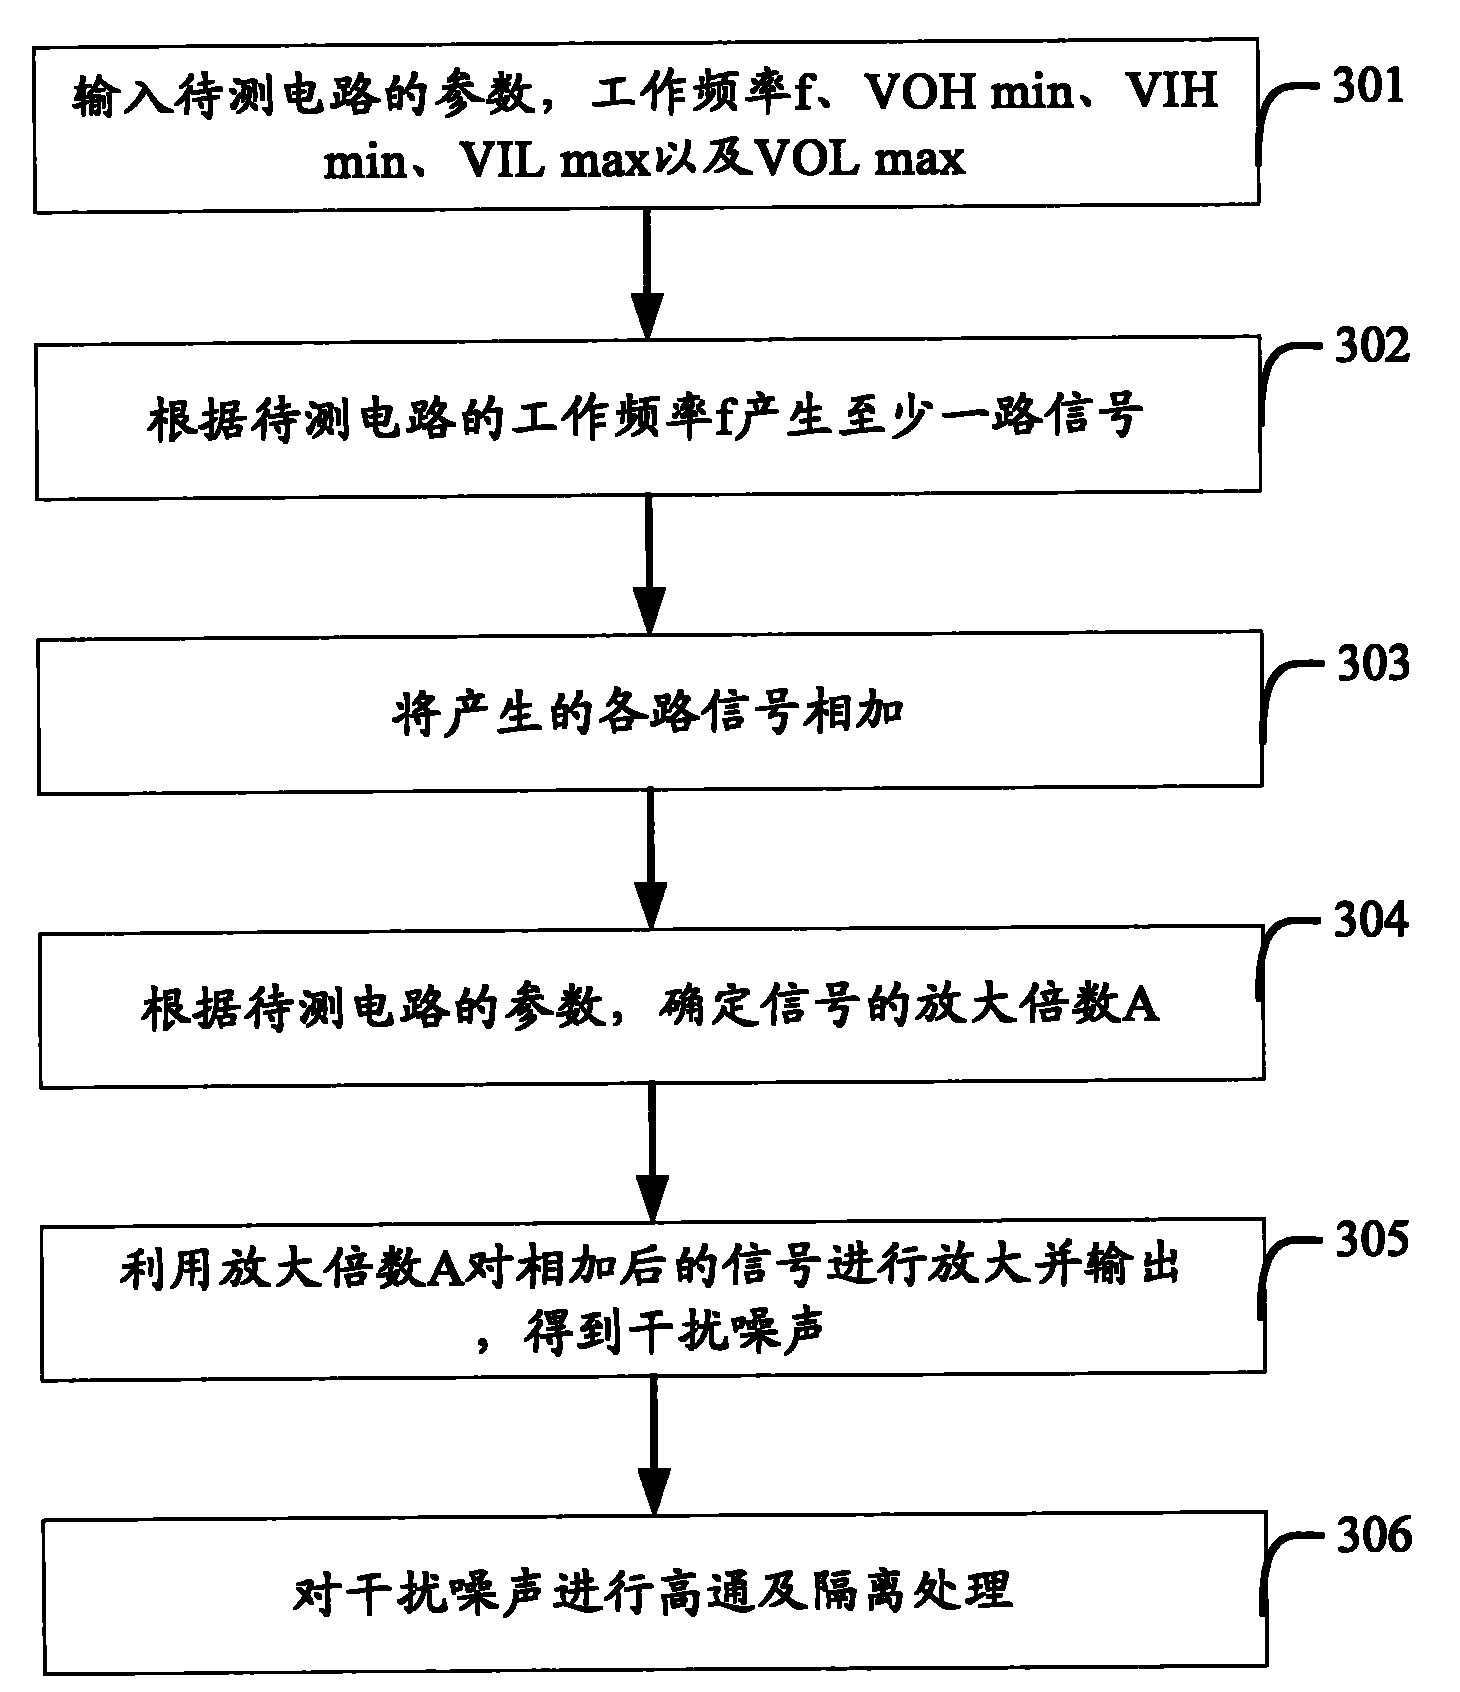 Method and device for generating interfering noise and method and system for testing voltage tolerance